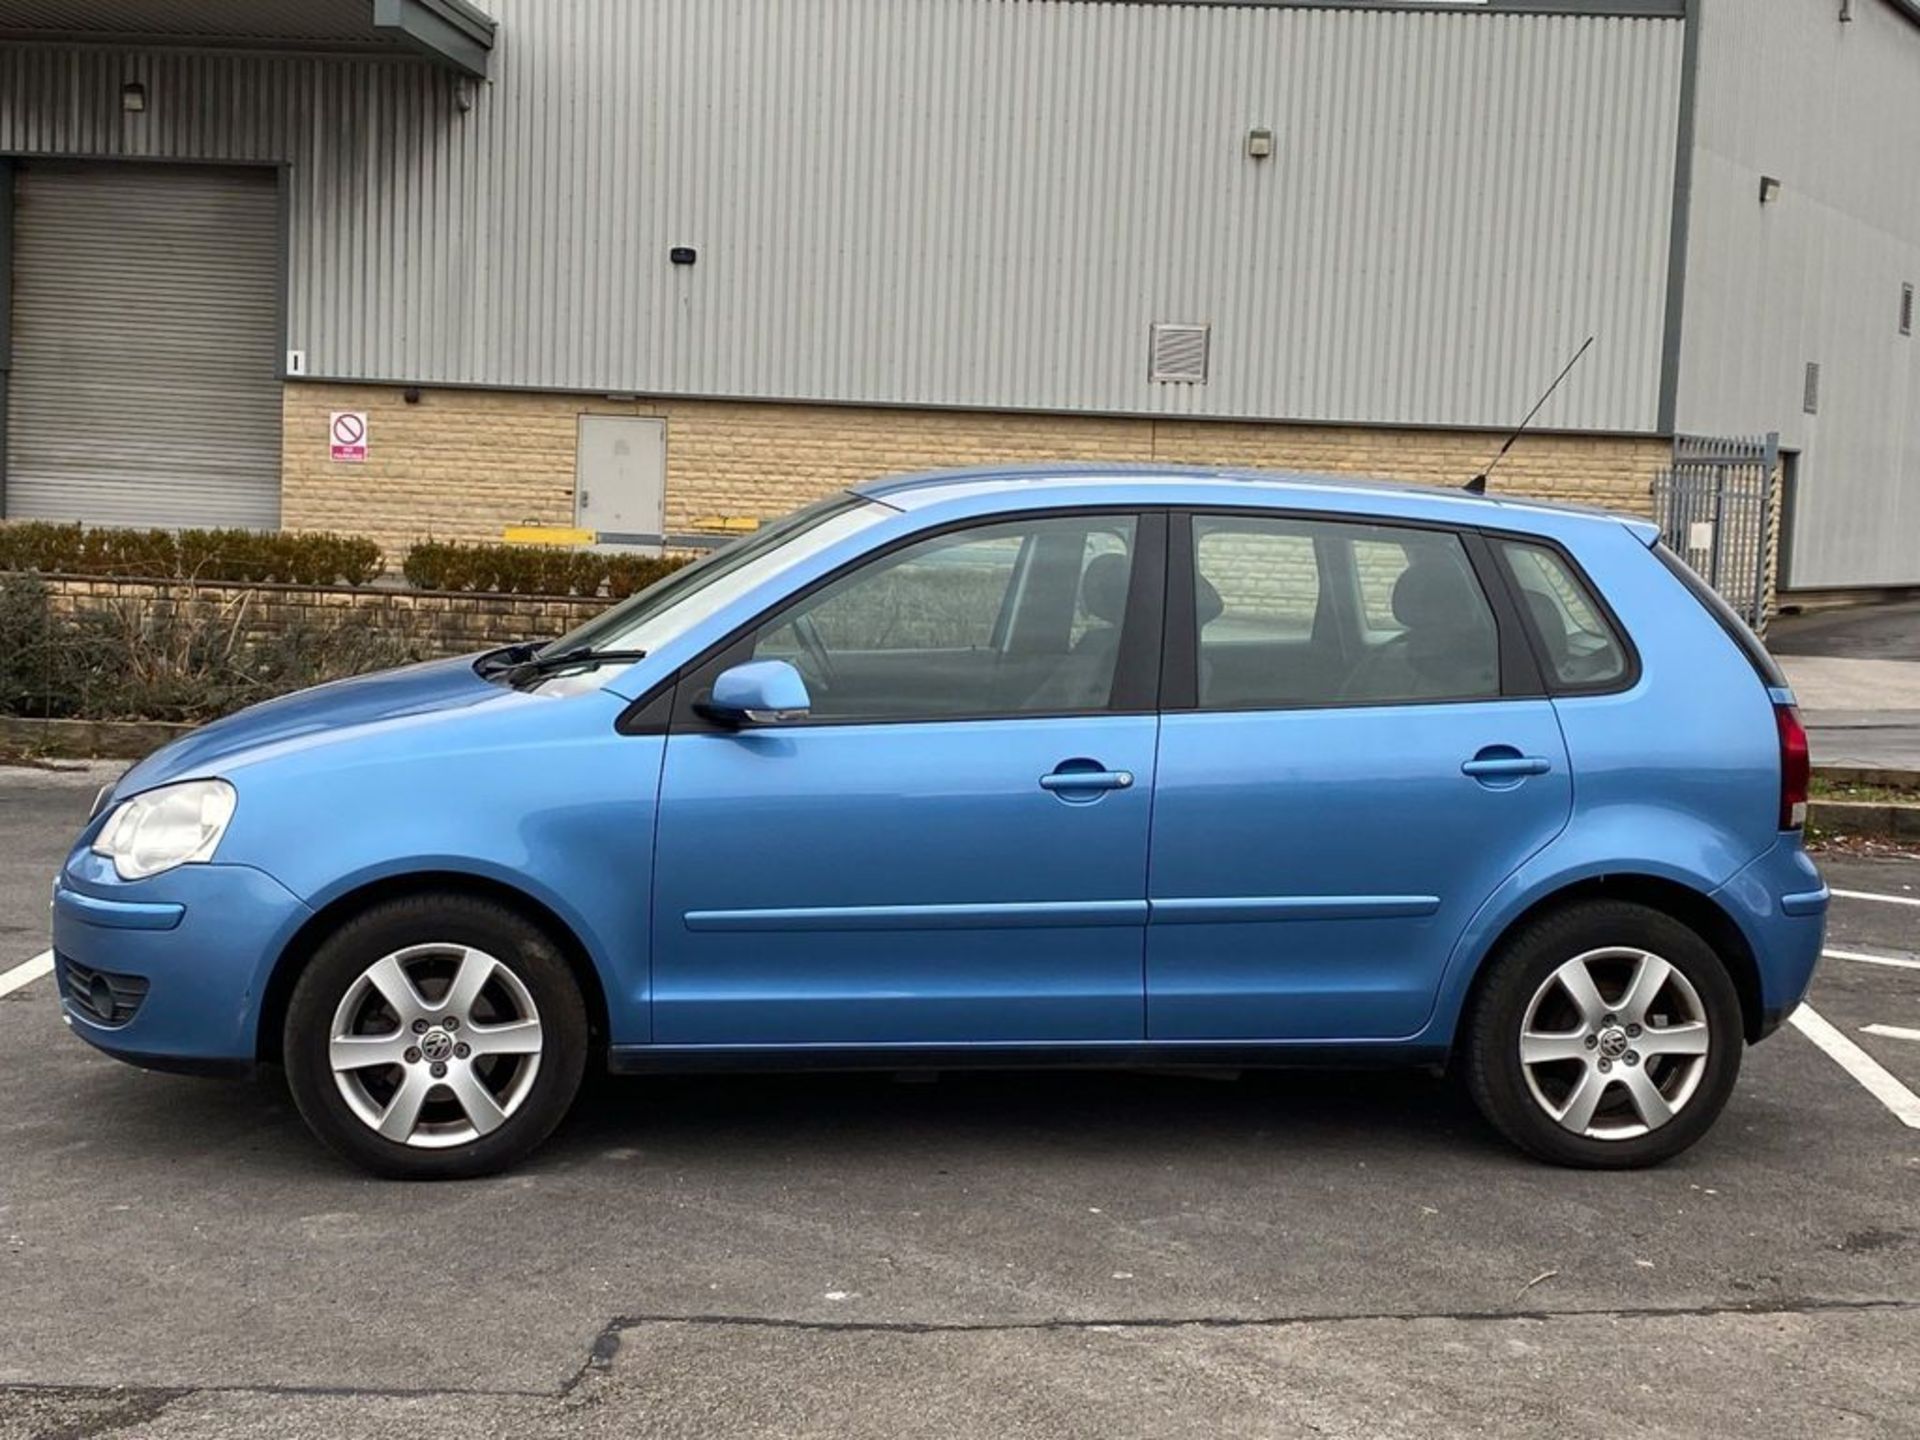 VOLKSWAGEN POLO 1.2 MATCH 5DR 2008 (58 REG) - Image 2 of 21